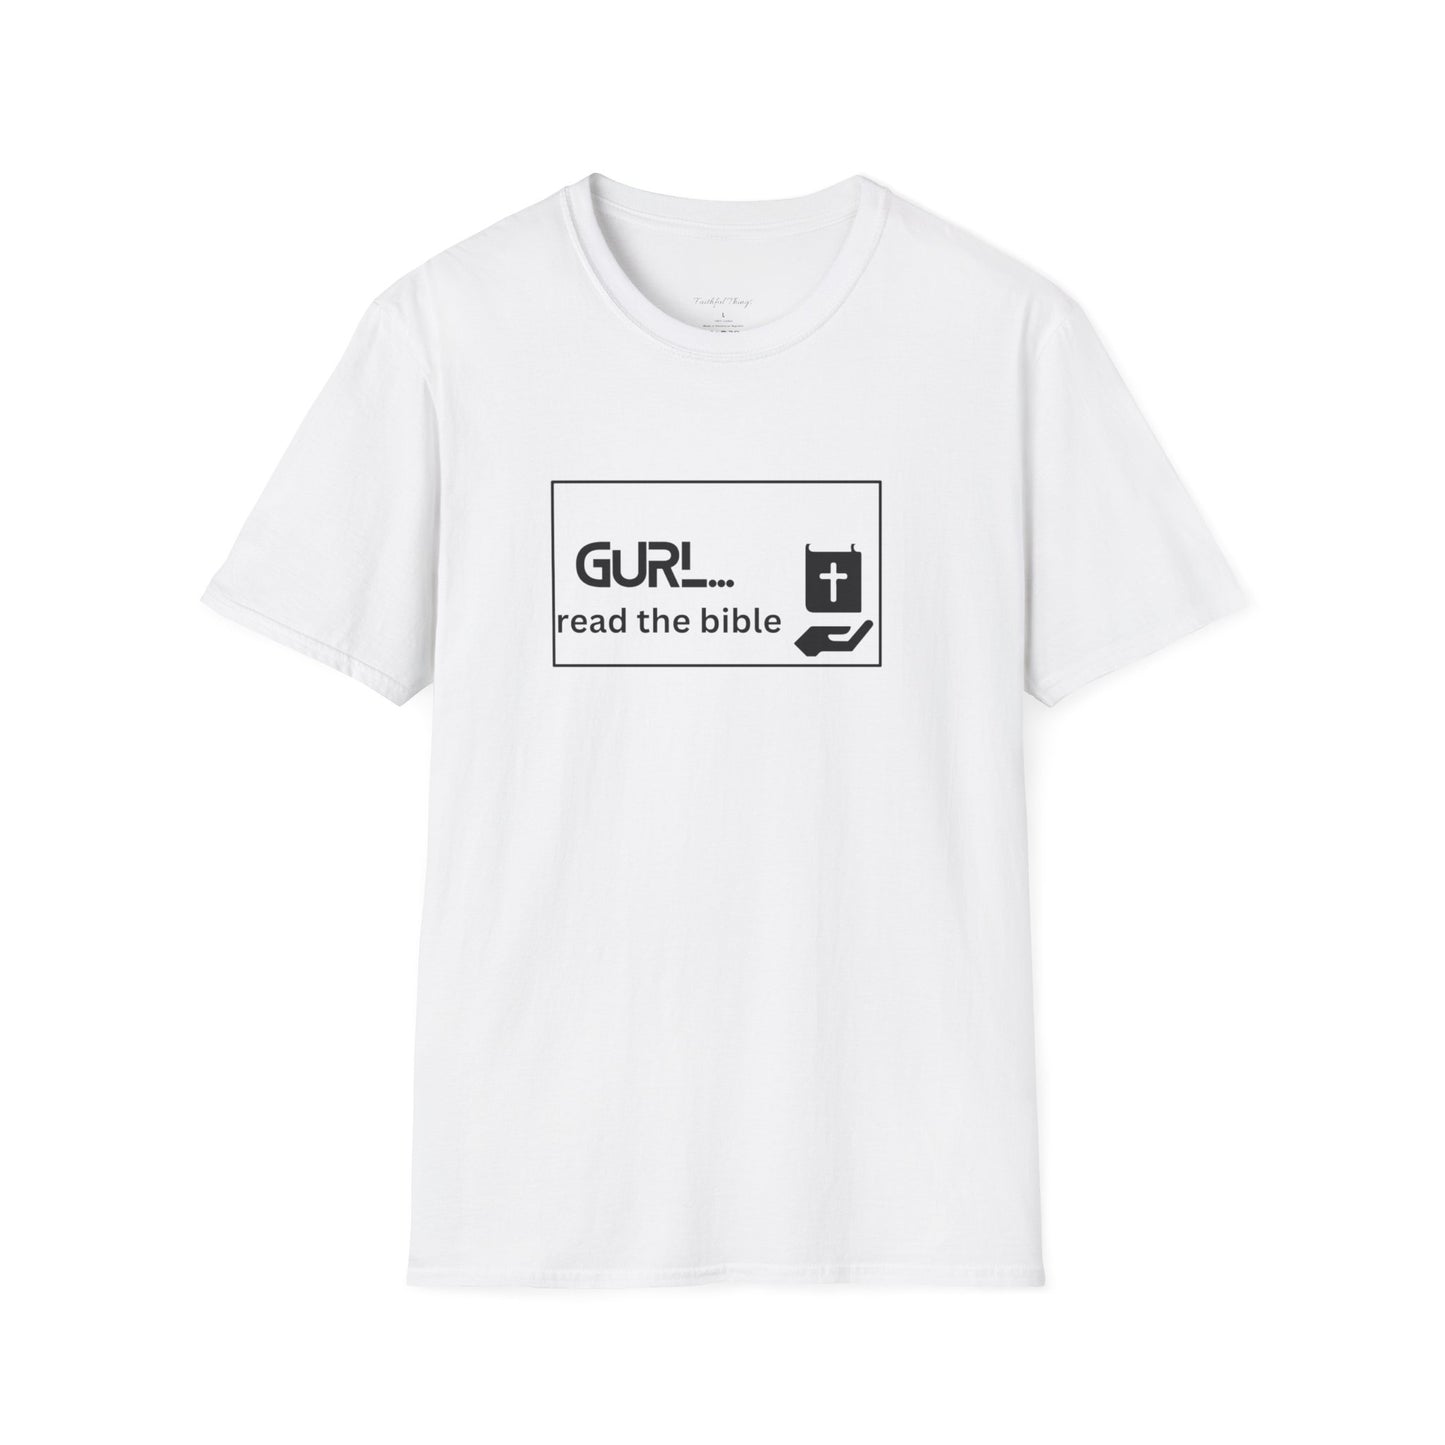 Gurl Read the Bible Tee for Women Soft Style T-Shirt